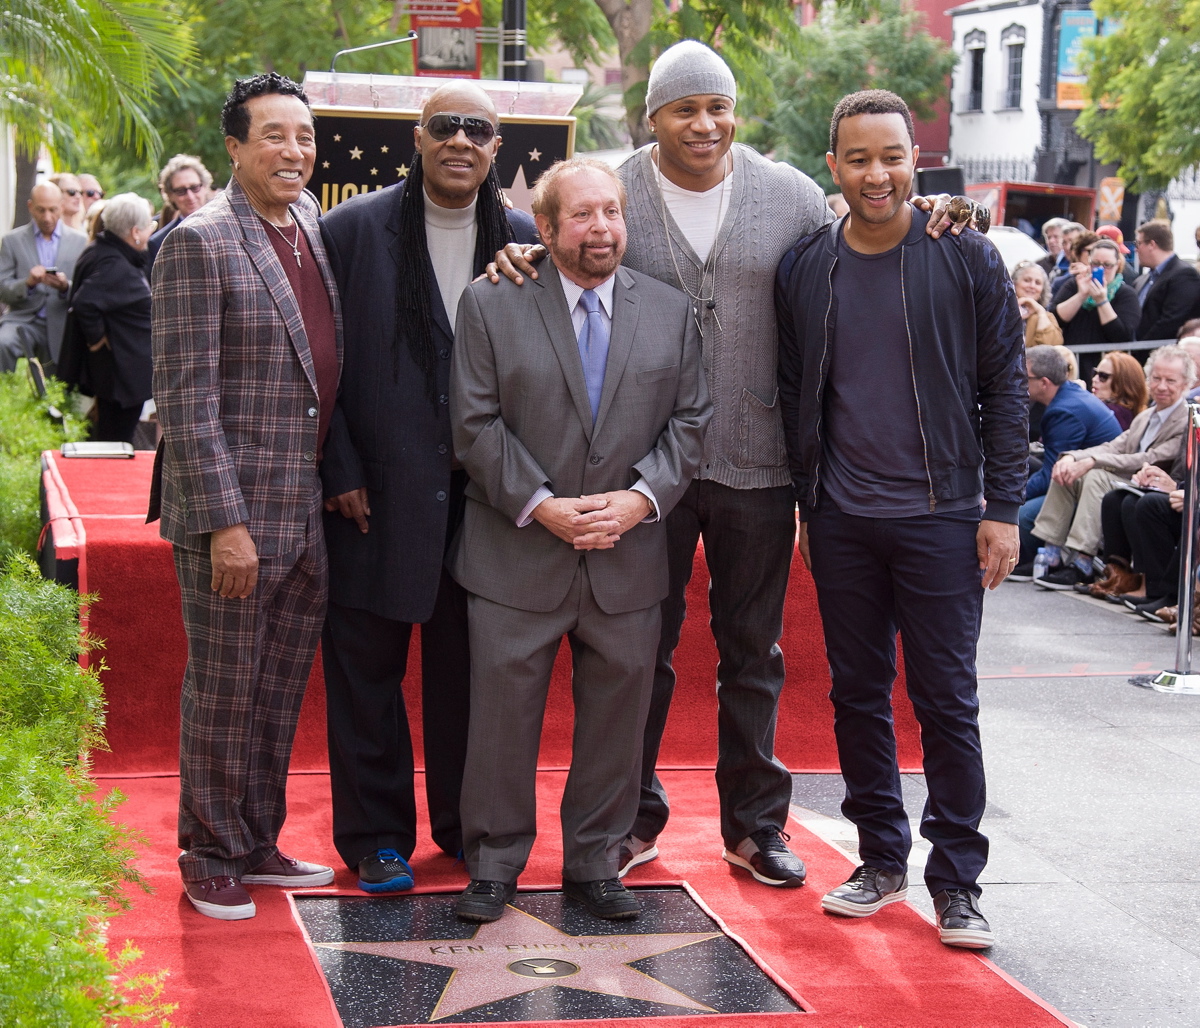 Television producer and director Ken Erhlich (c.) poses alongside musicians (l. to r.) Smokey Robinson, Stevie Wonder, LL Cool J and John Legend during his Hollywood Walk of Fame ceremony on Jan. 28, 2015.